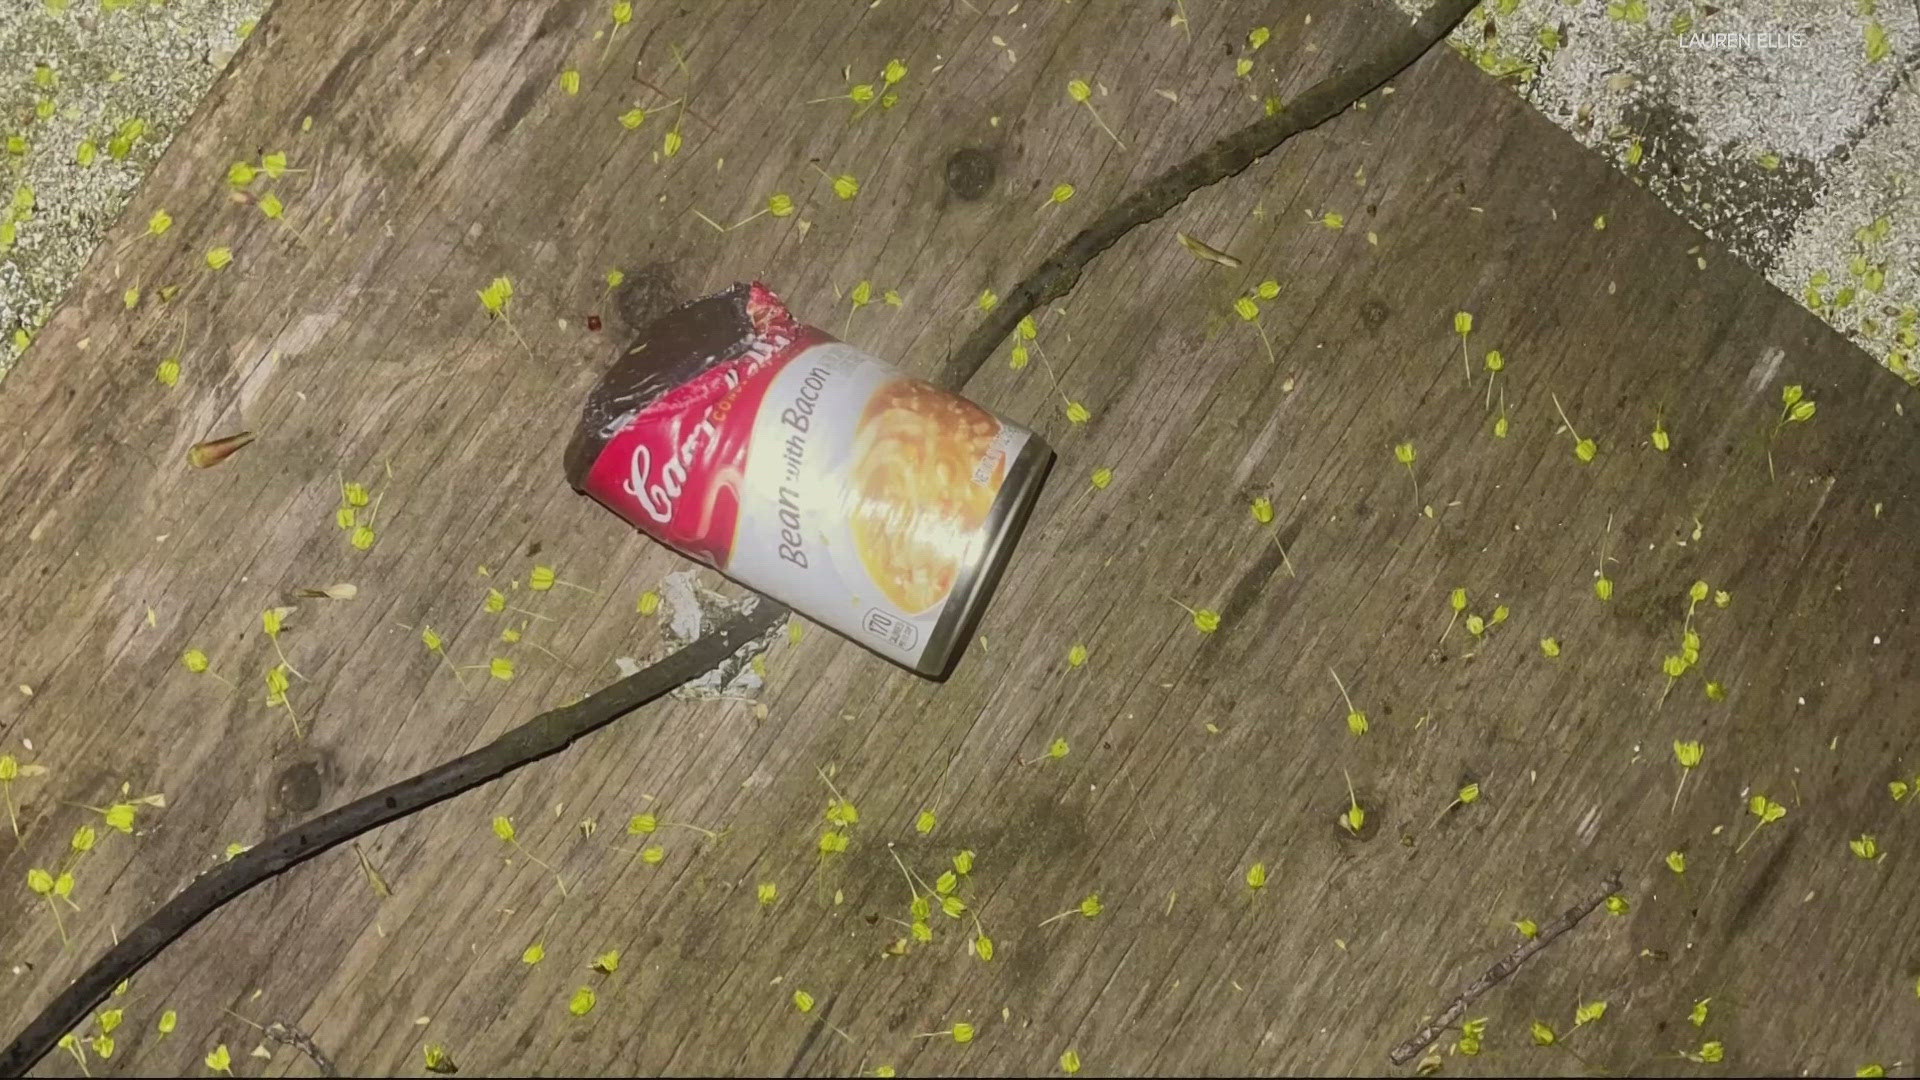 For weeks, someone has been throwing canned goods from an apartment complex on Southwest Jefferson and Broadway.